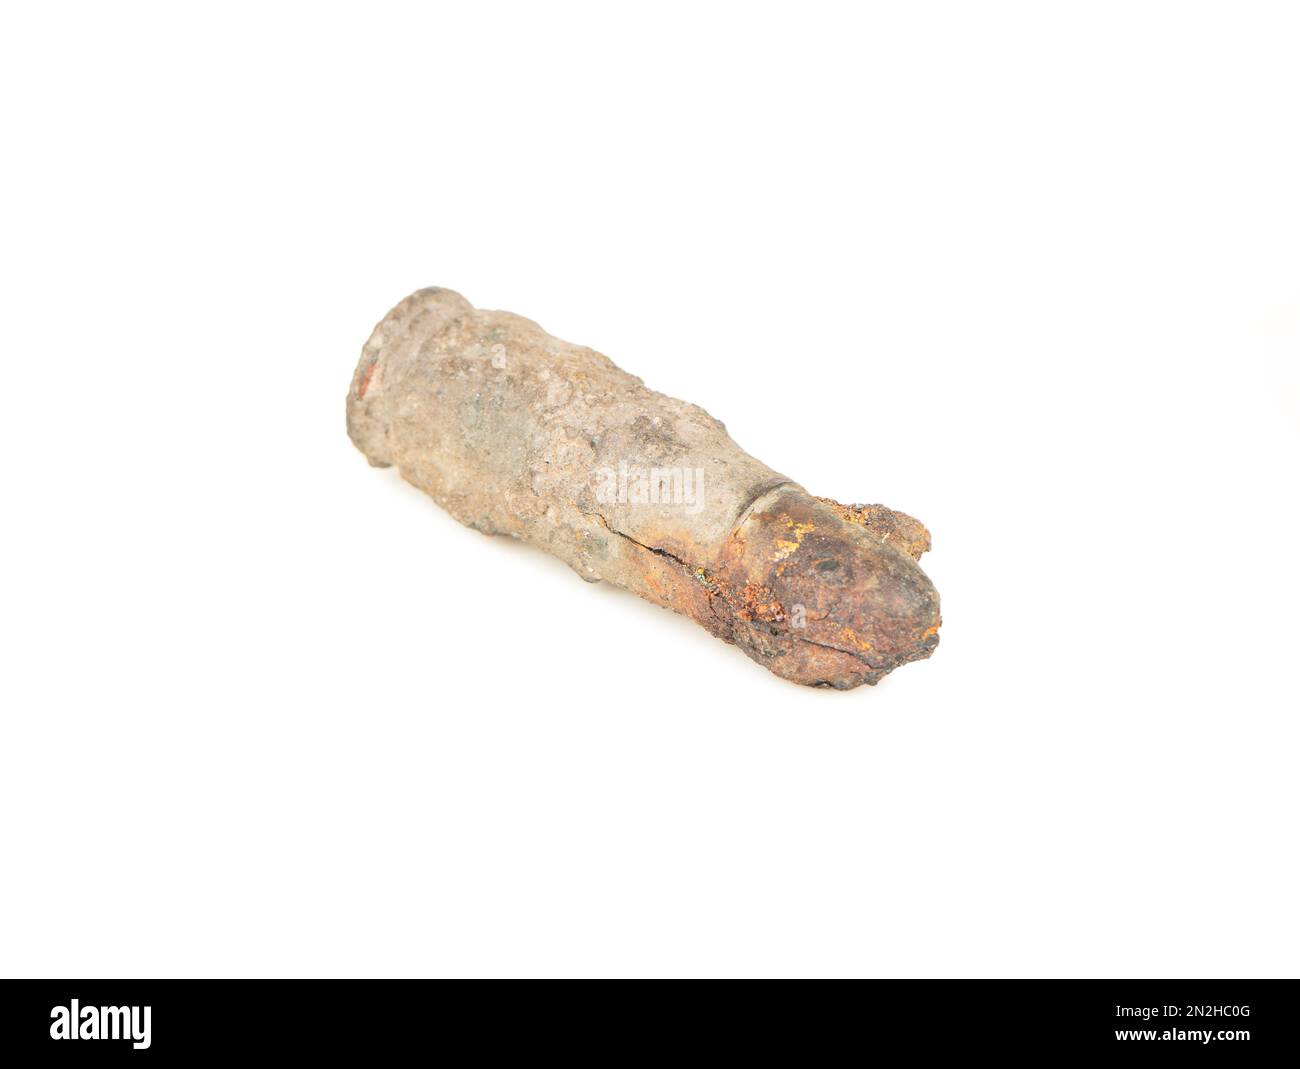 Old rusty bullet from a pistol from the Second World War isolate on a white background Stock Photo